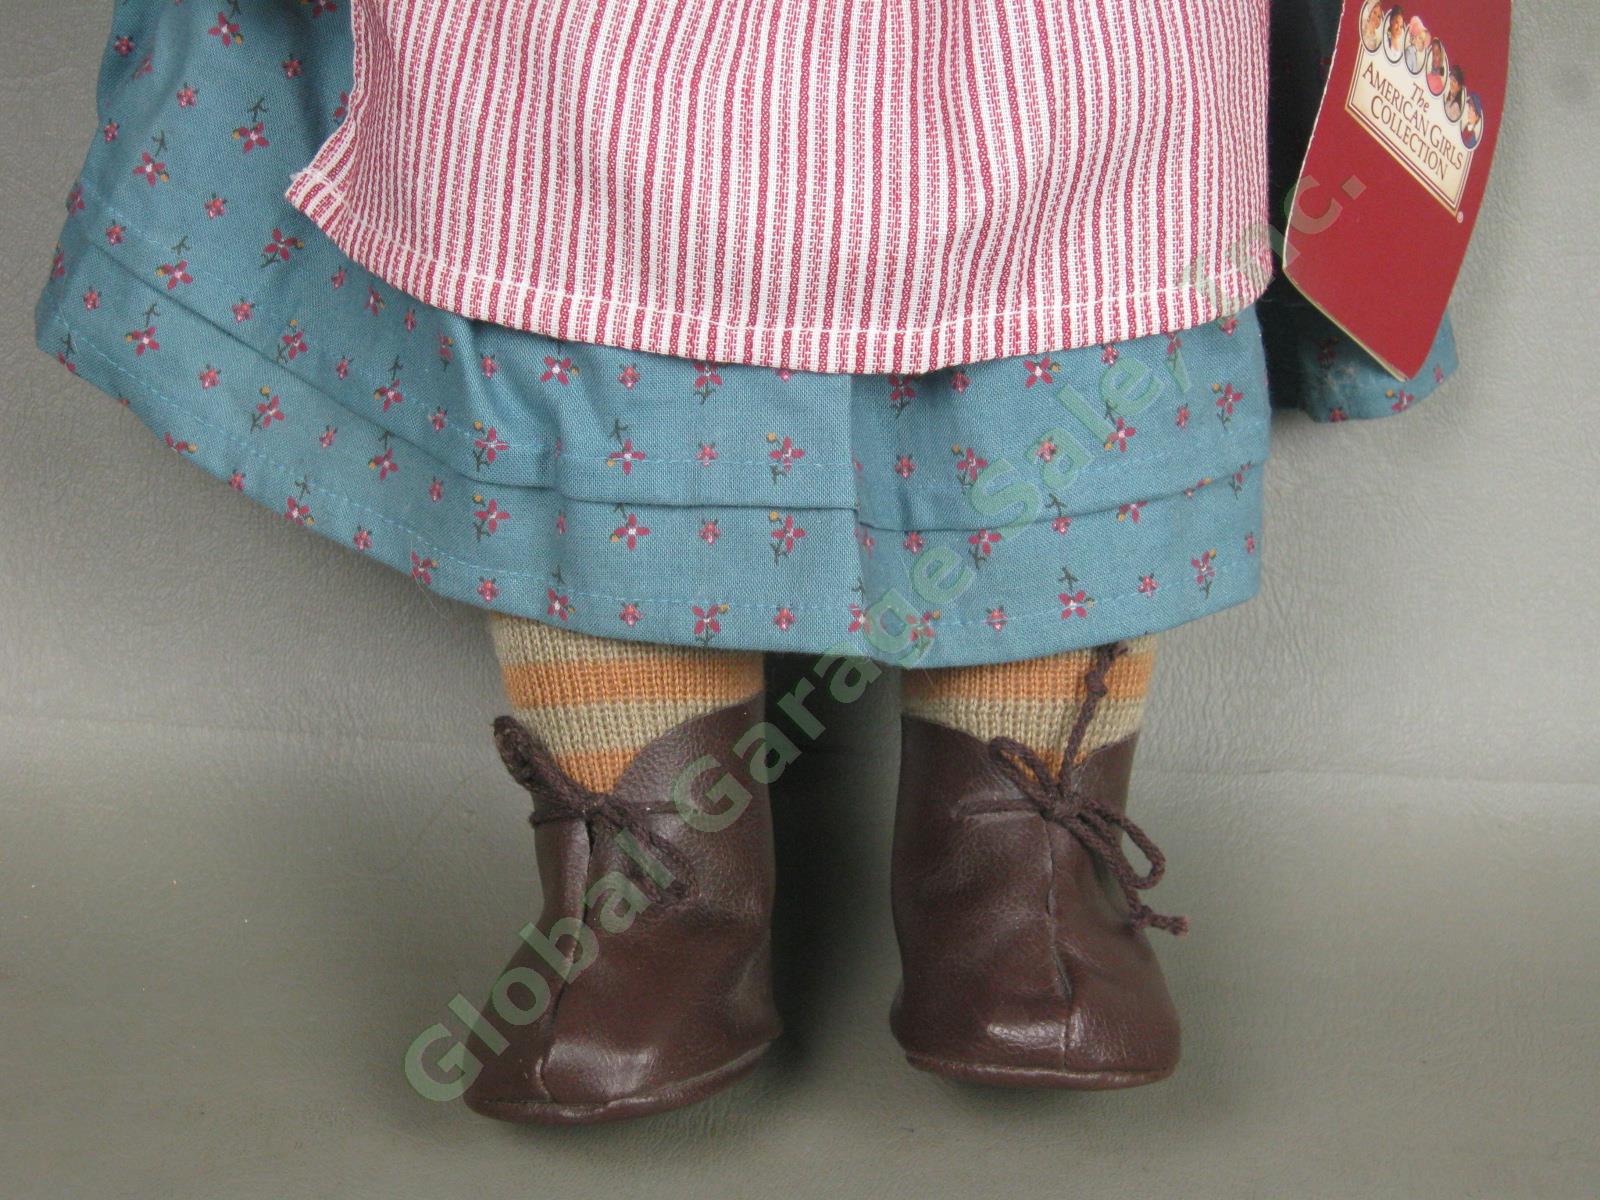 Vintage American Girl 18" Kirsten Doll Pleasant Company Christmas 1994 Exc Cond! 3